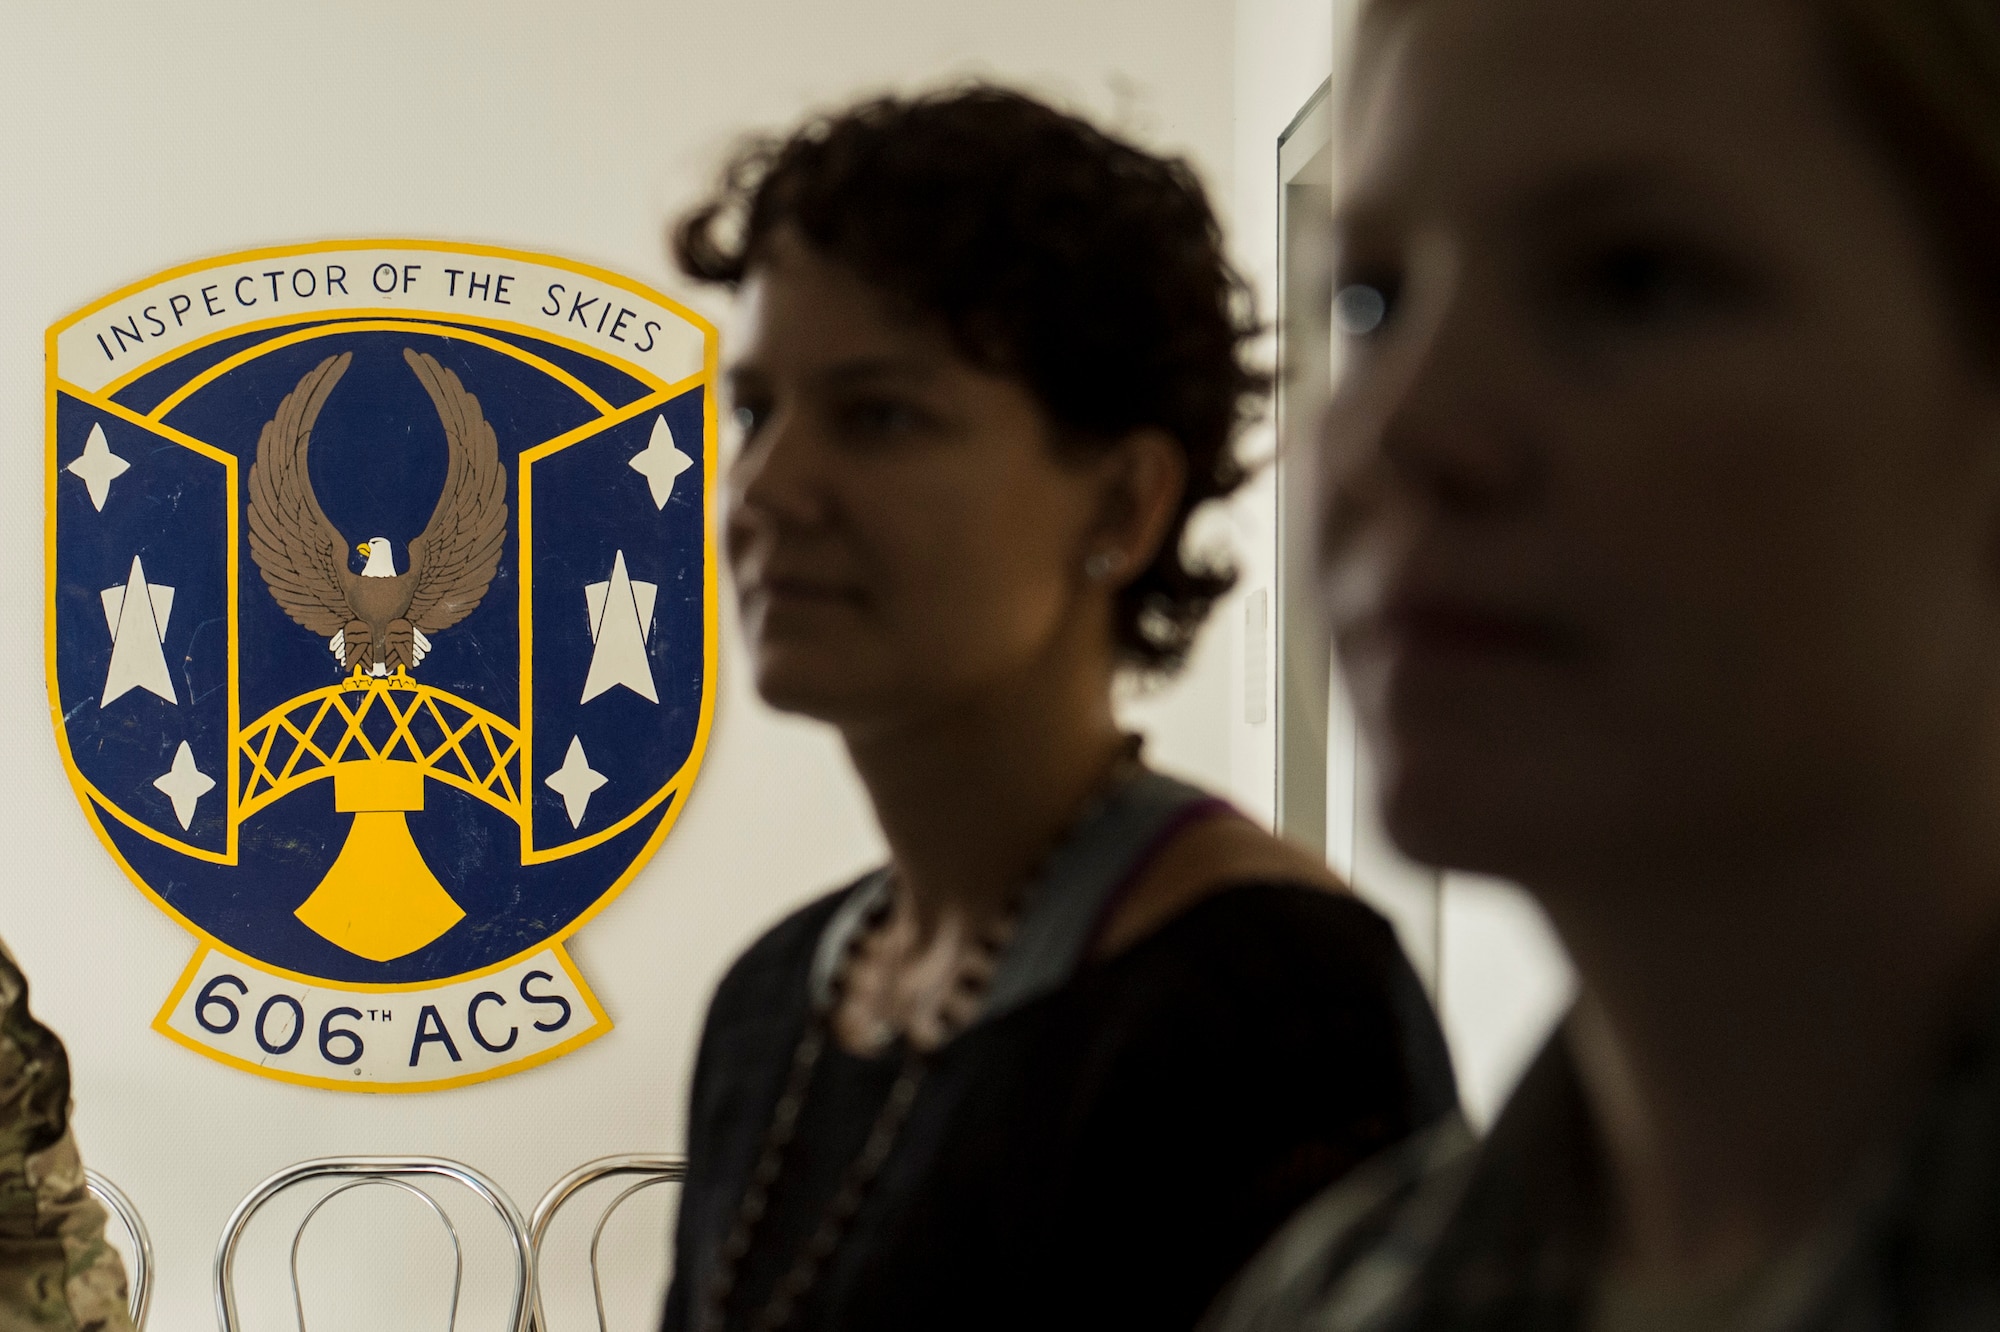 A painted logo of the 606th Air Control Squadron is displayed on the wall during a spouses’ pre-deployment brief Sept. 19, 2014, at Spangdahlem Air Base, Germany. Spouses received pertinent information regarding the unit's deployment during the briefing. (U.S. Air Force photo by Senior Airman Rusty Frank/Released)